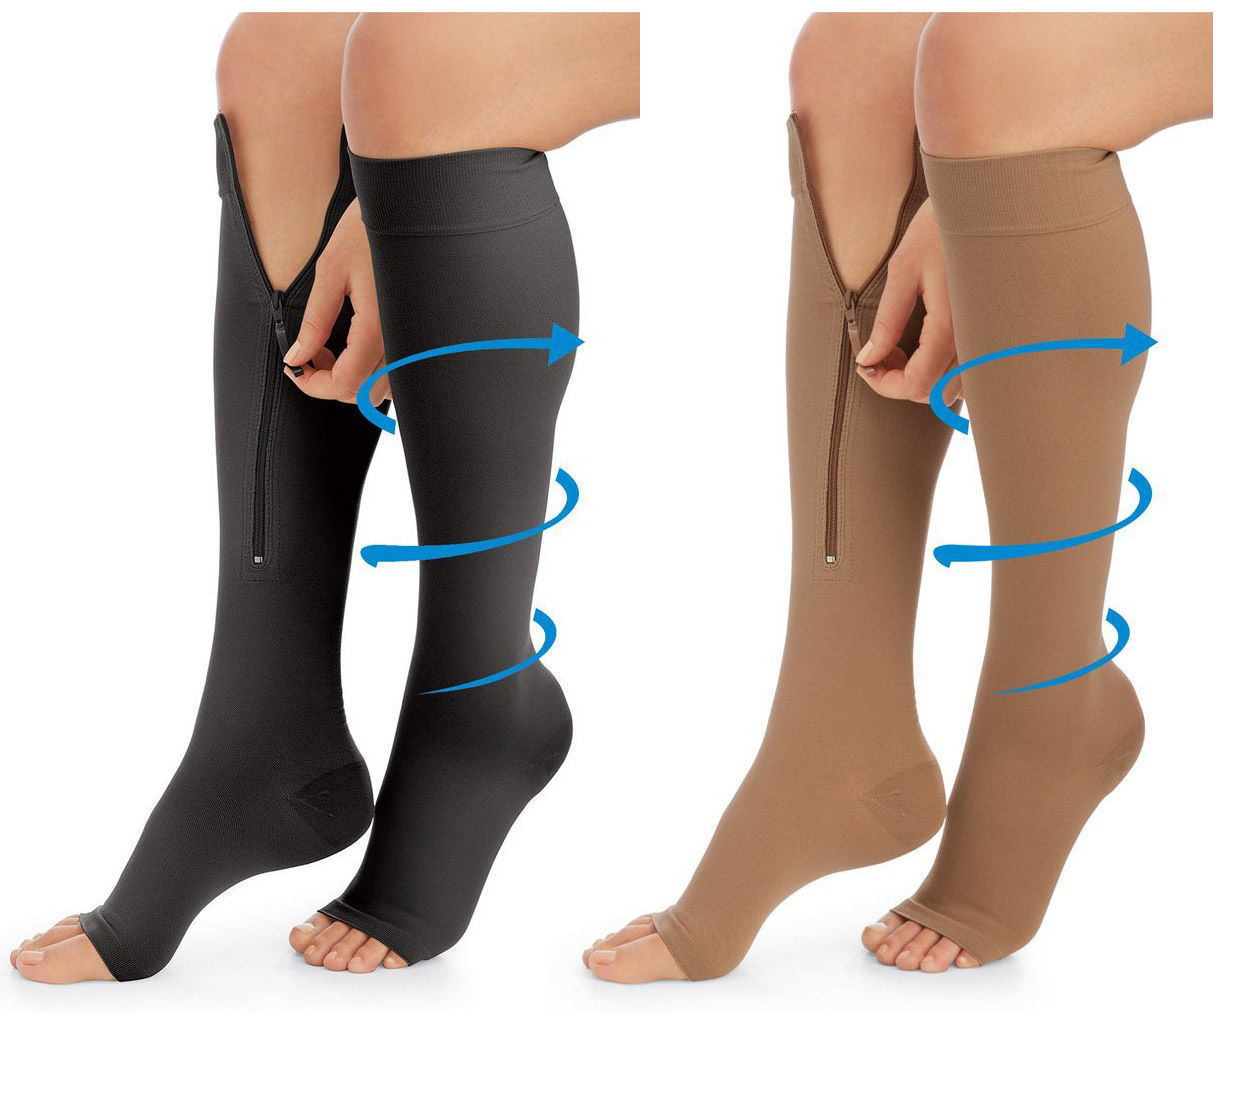 Primary image for 23-32 mmHg Medical Compression Socks, Open Toe ,Zippered Knee-High Stockings